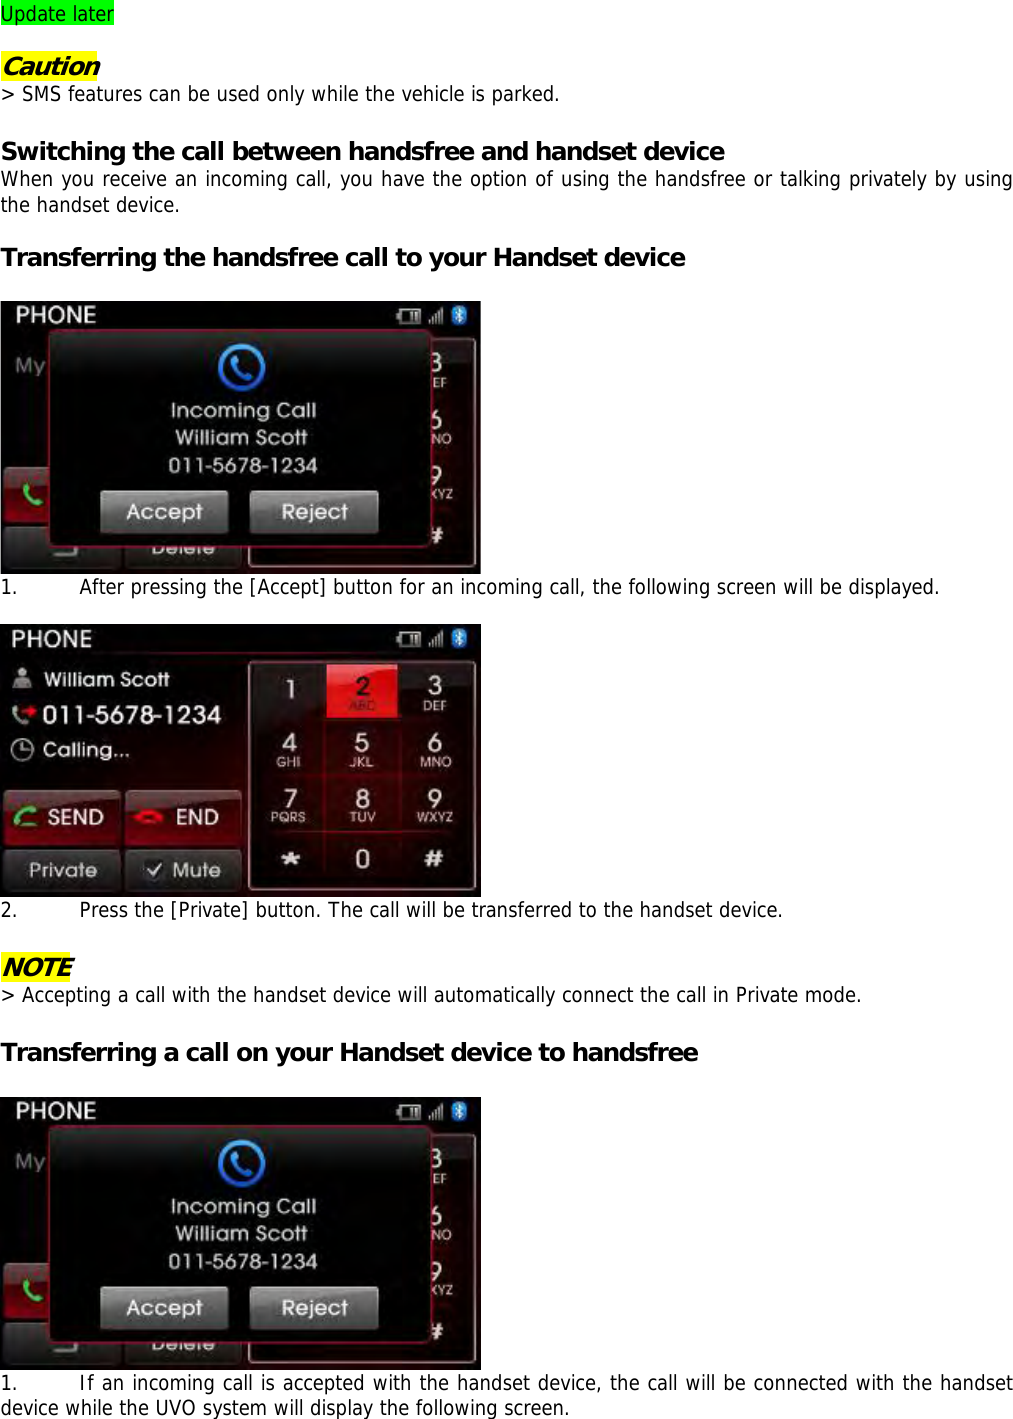 Update later  Caution &gt; SMS features can be used only while the vehicle is parked.   Switching the call between handsfree and handset device When you receive an incoming call, you have the option of using the handsfree or talking privately by using the handset device.   Transferring the handsfree call to your Handset device   1. After pressing the [Accept] button for an incoming call, the following screen will be displayed.   2. Press the [Private] button. The call will be transferred to the handset device.  NOTE &gt; Accepting a call with the handset device will automatically connect the call in Private mode.   Transferring a call on your Handset device to handsfree   1. If an incoming call is accepted with the handset device, the call will be connected with the handset device while the UVO system will display the following screen.  